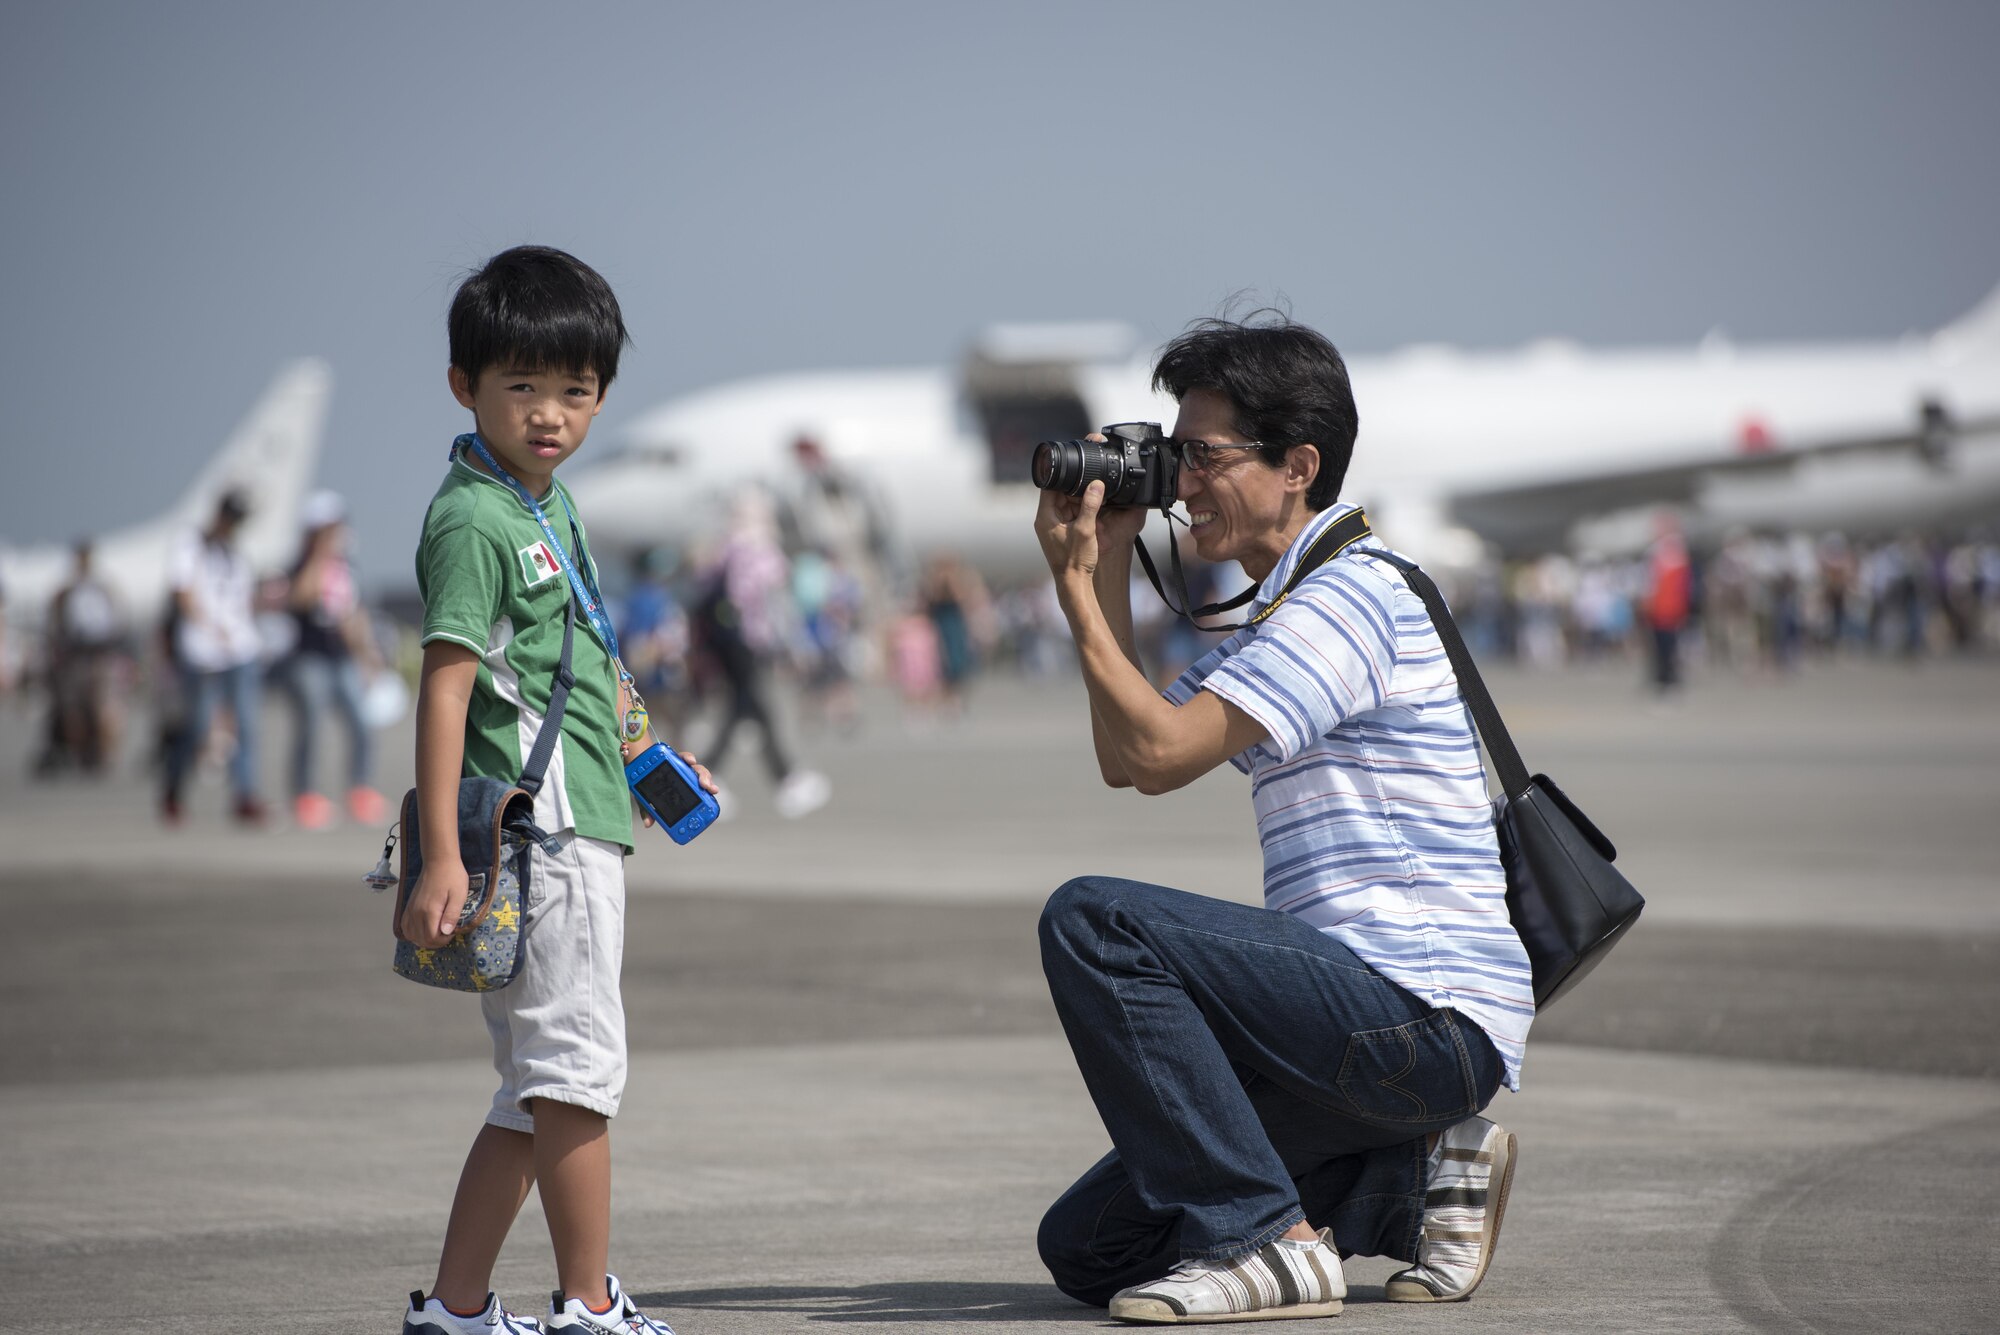 A man photographs his son in front of an aircraft at the 2016 Japanese-American Friendship Festival at Yokota Air Base, Japan, Sept. 17, 2016. The festival is held annually at Yokota; more than 185,000 festivalgoers attended in 2015. (U.S. Air Force photo by Staff Sgt. Cody H. Ramirez/Released)